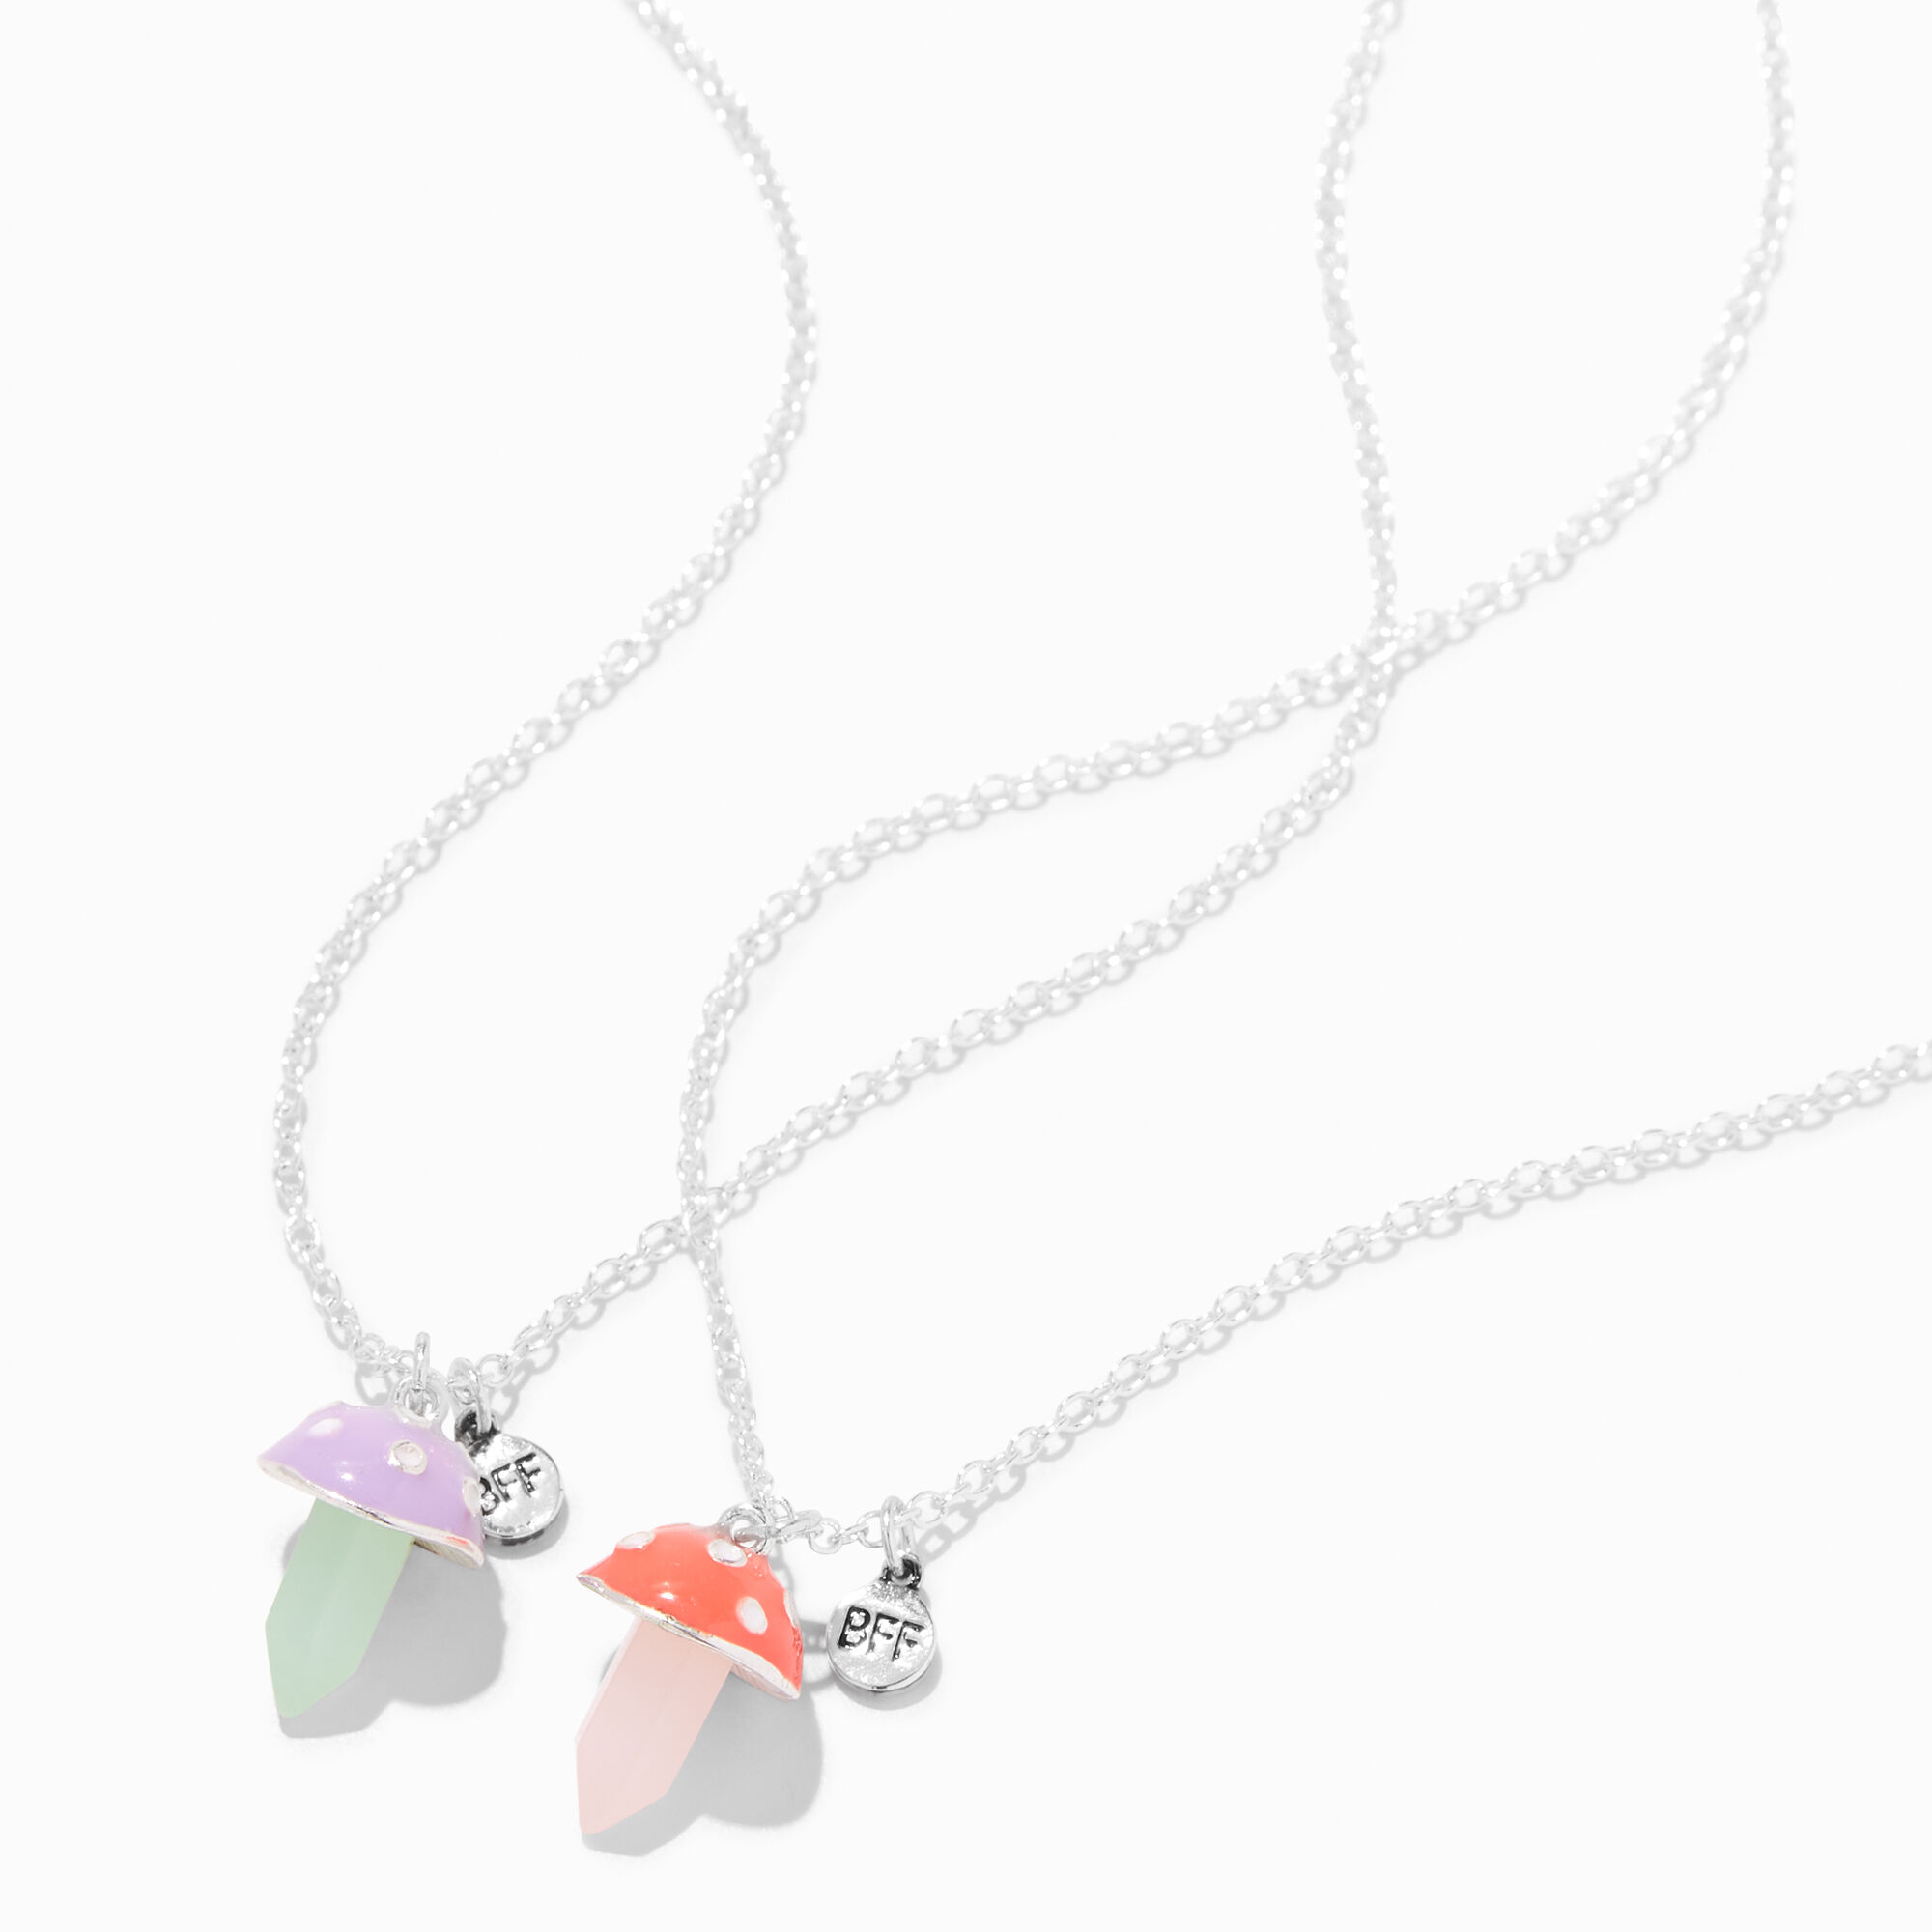 Claire's Best Friends Celestial Butterfly Pendant Necklaces - 2 Pack |  CoolSprings Galleria